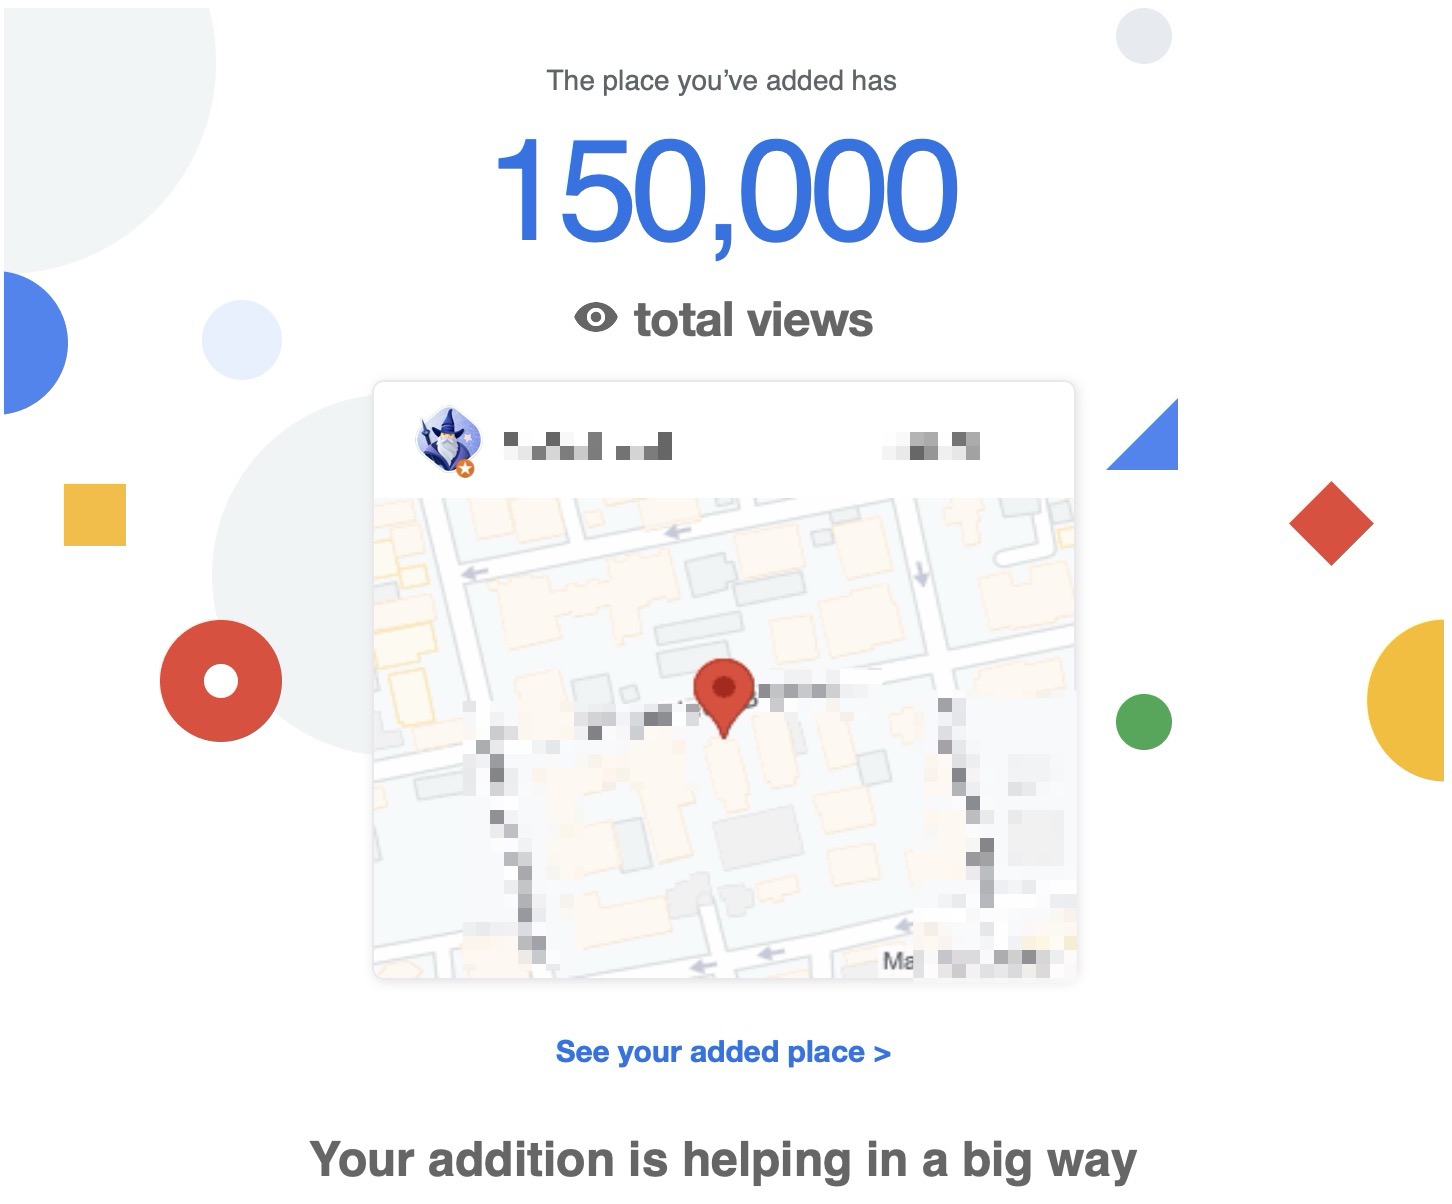 Google-Maps Results in 4 months